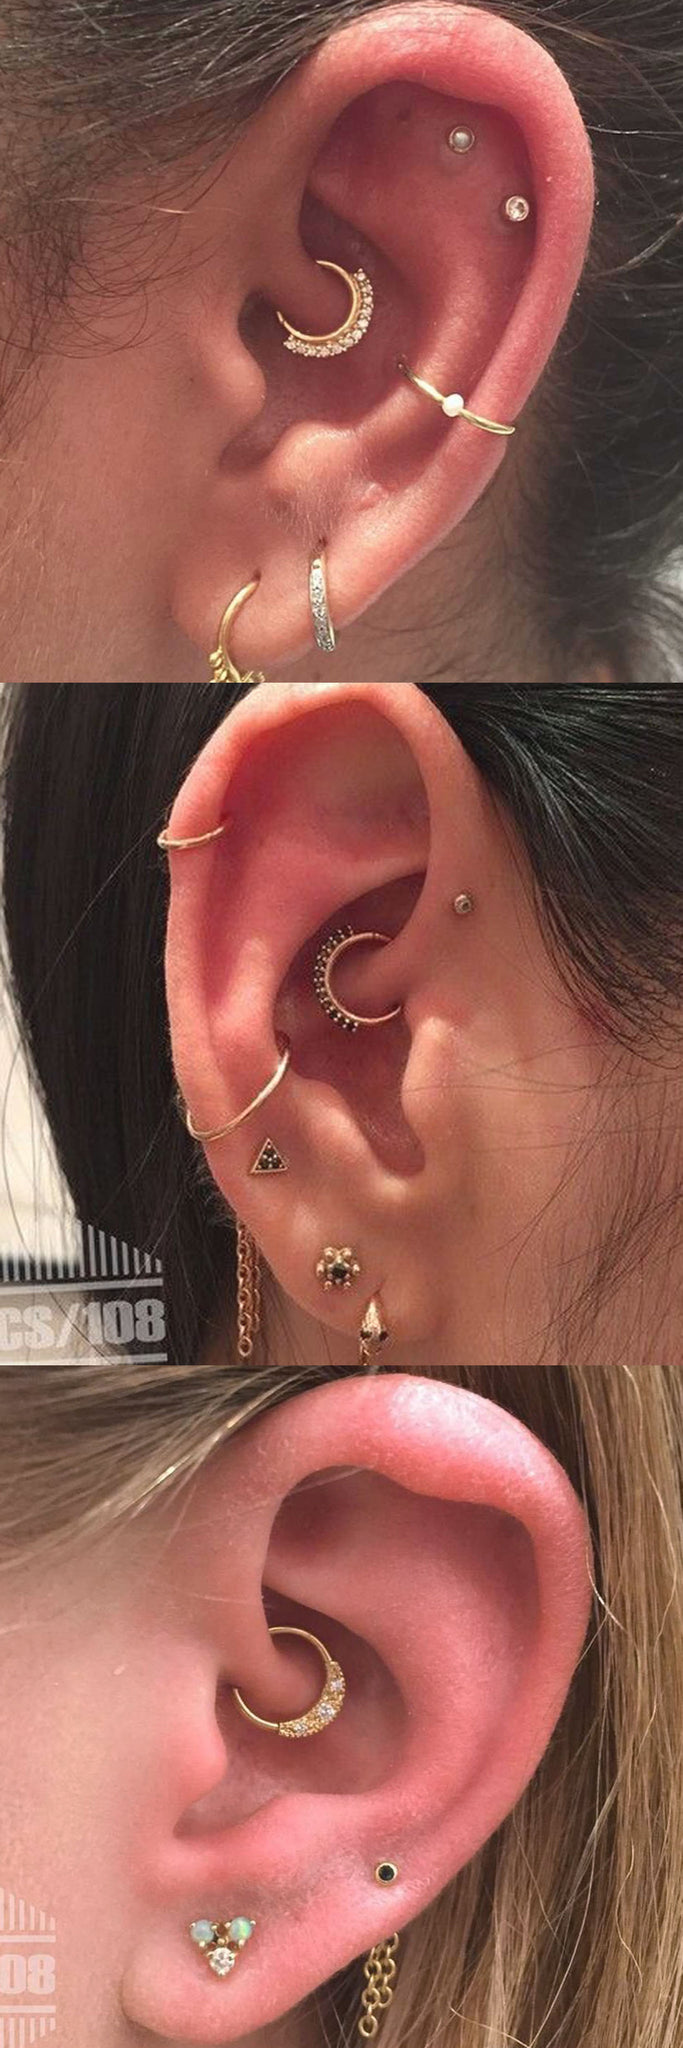 Delicate Ear Piercing Ideas Combinations - Rook Piercing Jewelry - Gold Cartilage Rings - Conch Hoop at MyBodiArt.com